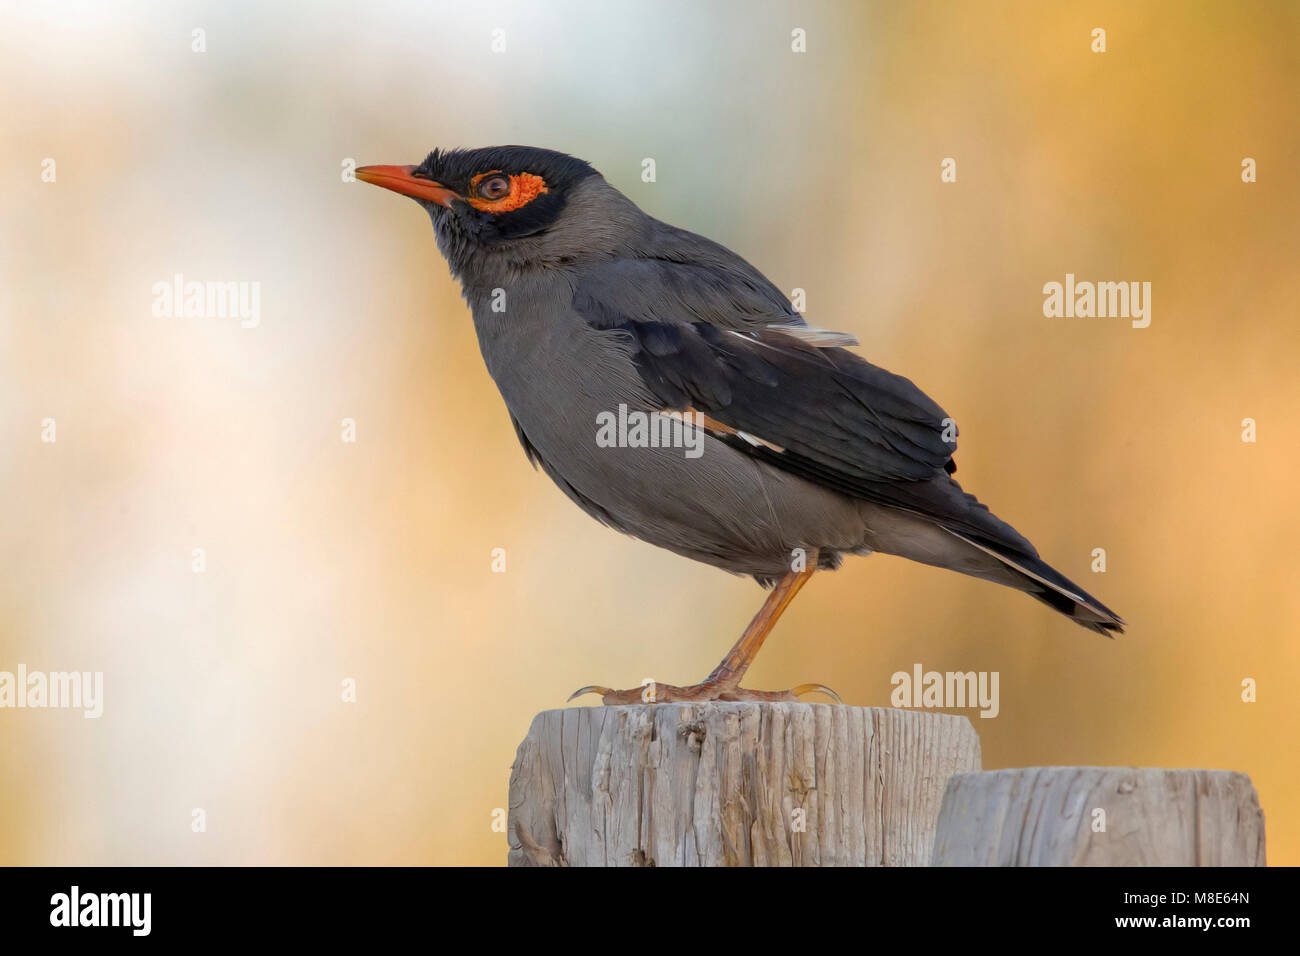 Maina : 46 Maina Bird Photos And Premium High Res Pictures Getty Images